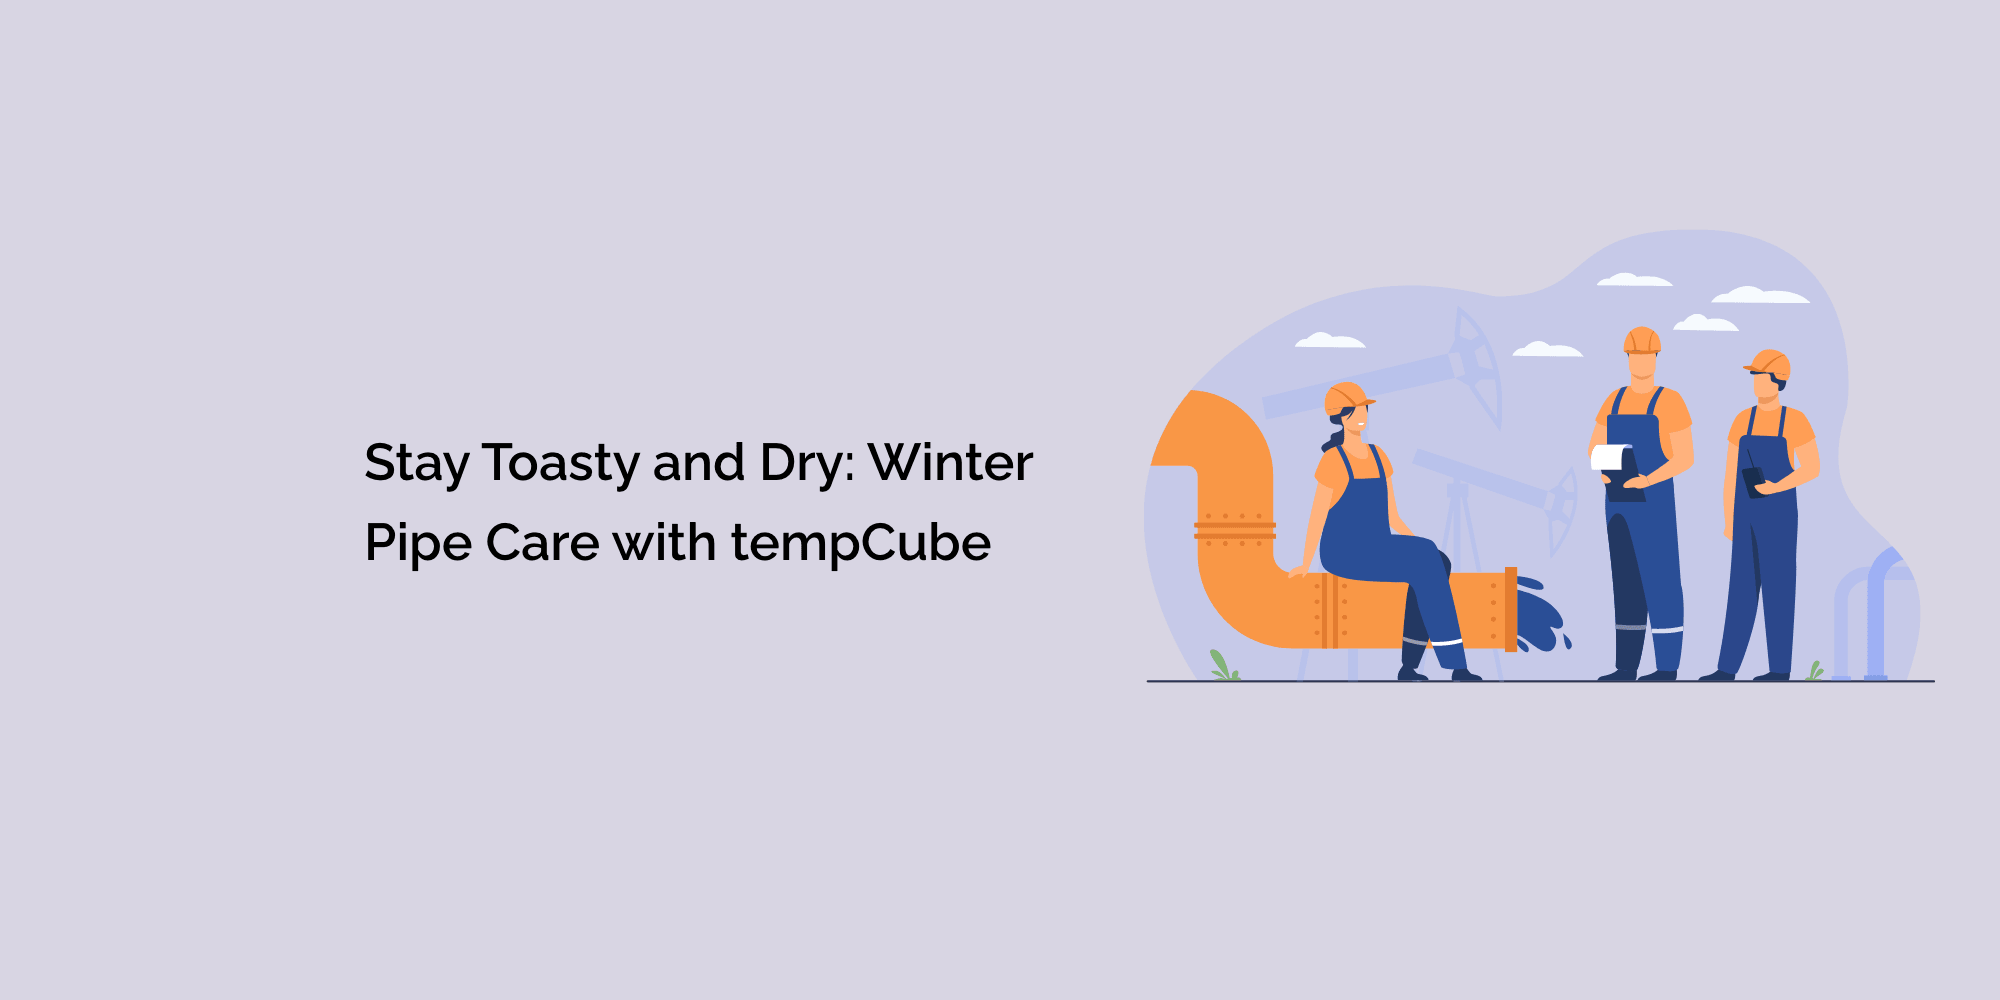 Stay Toasty and Dry: Winter Pipe Care with tempCube